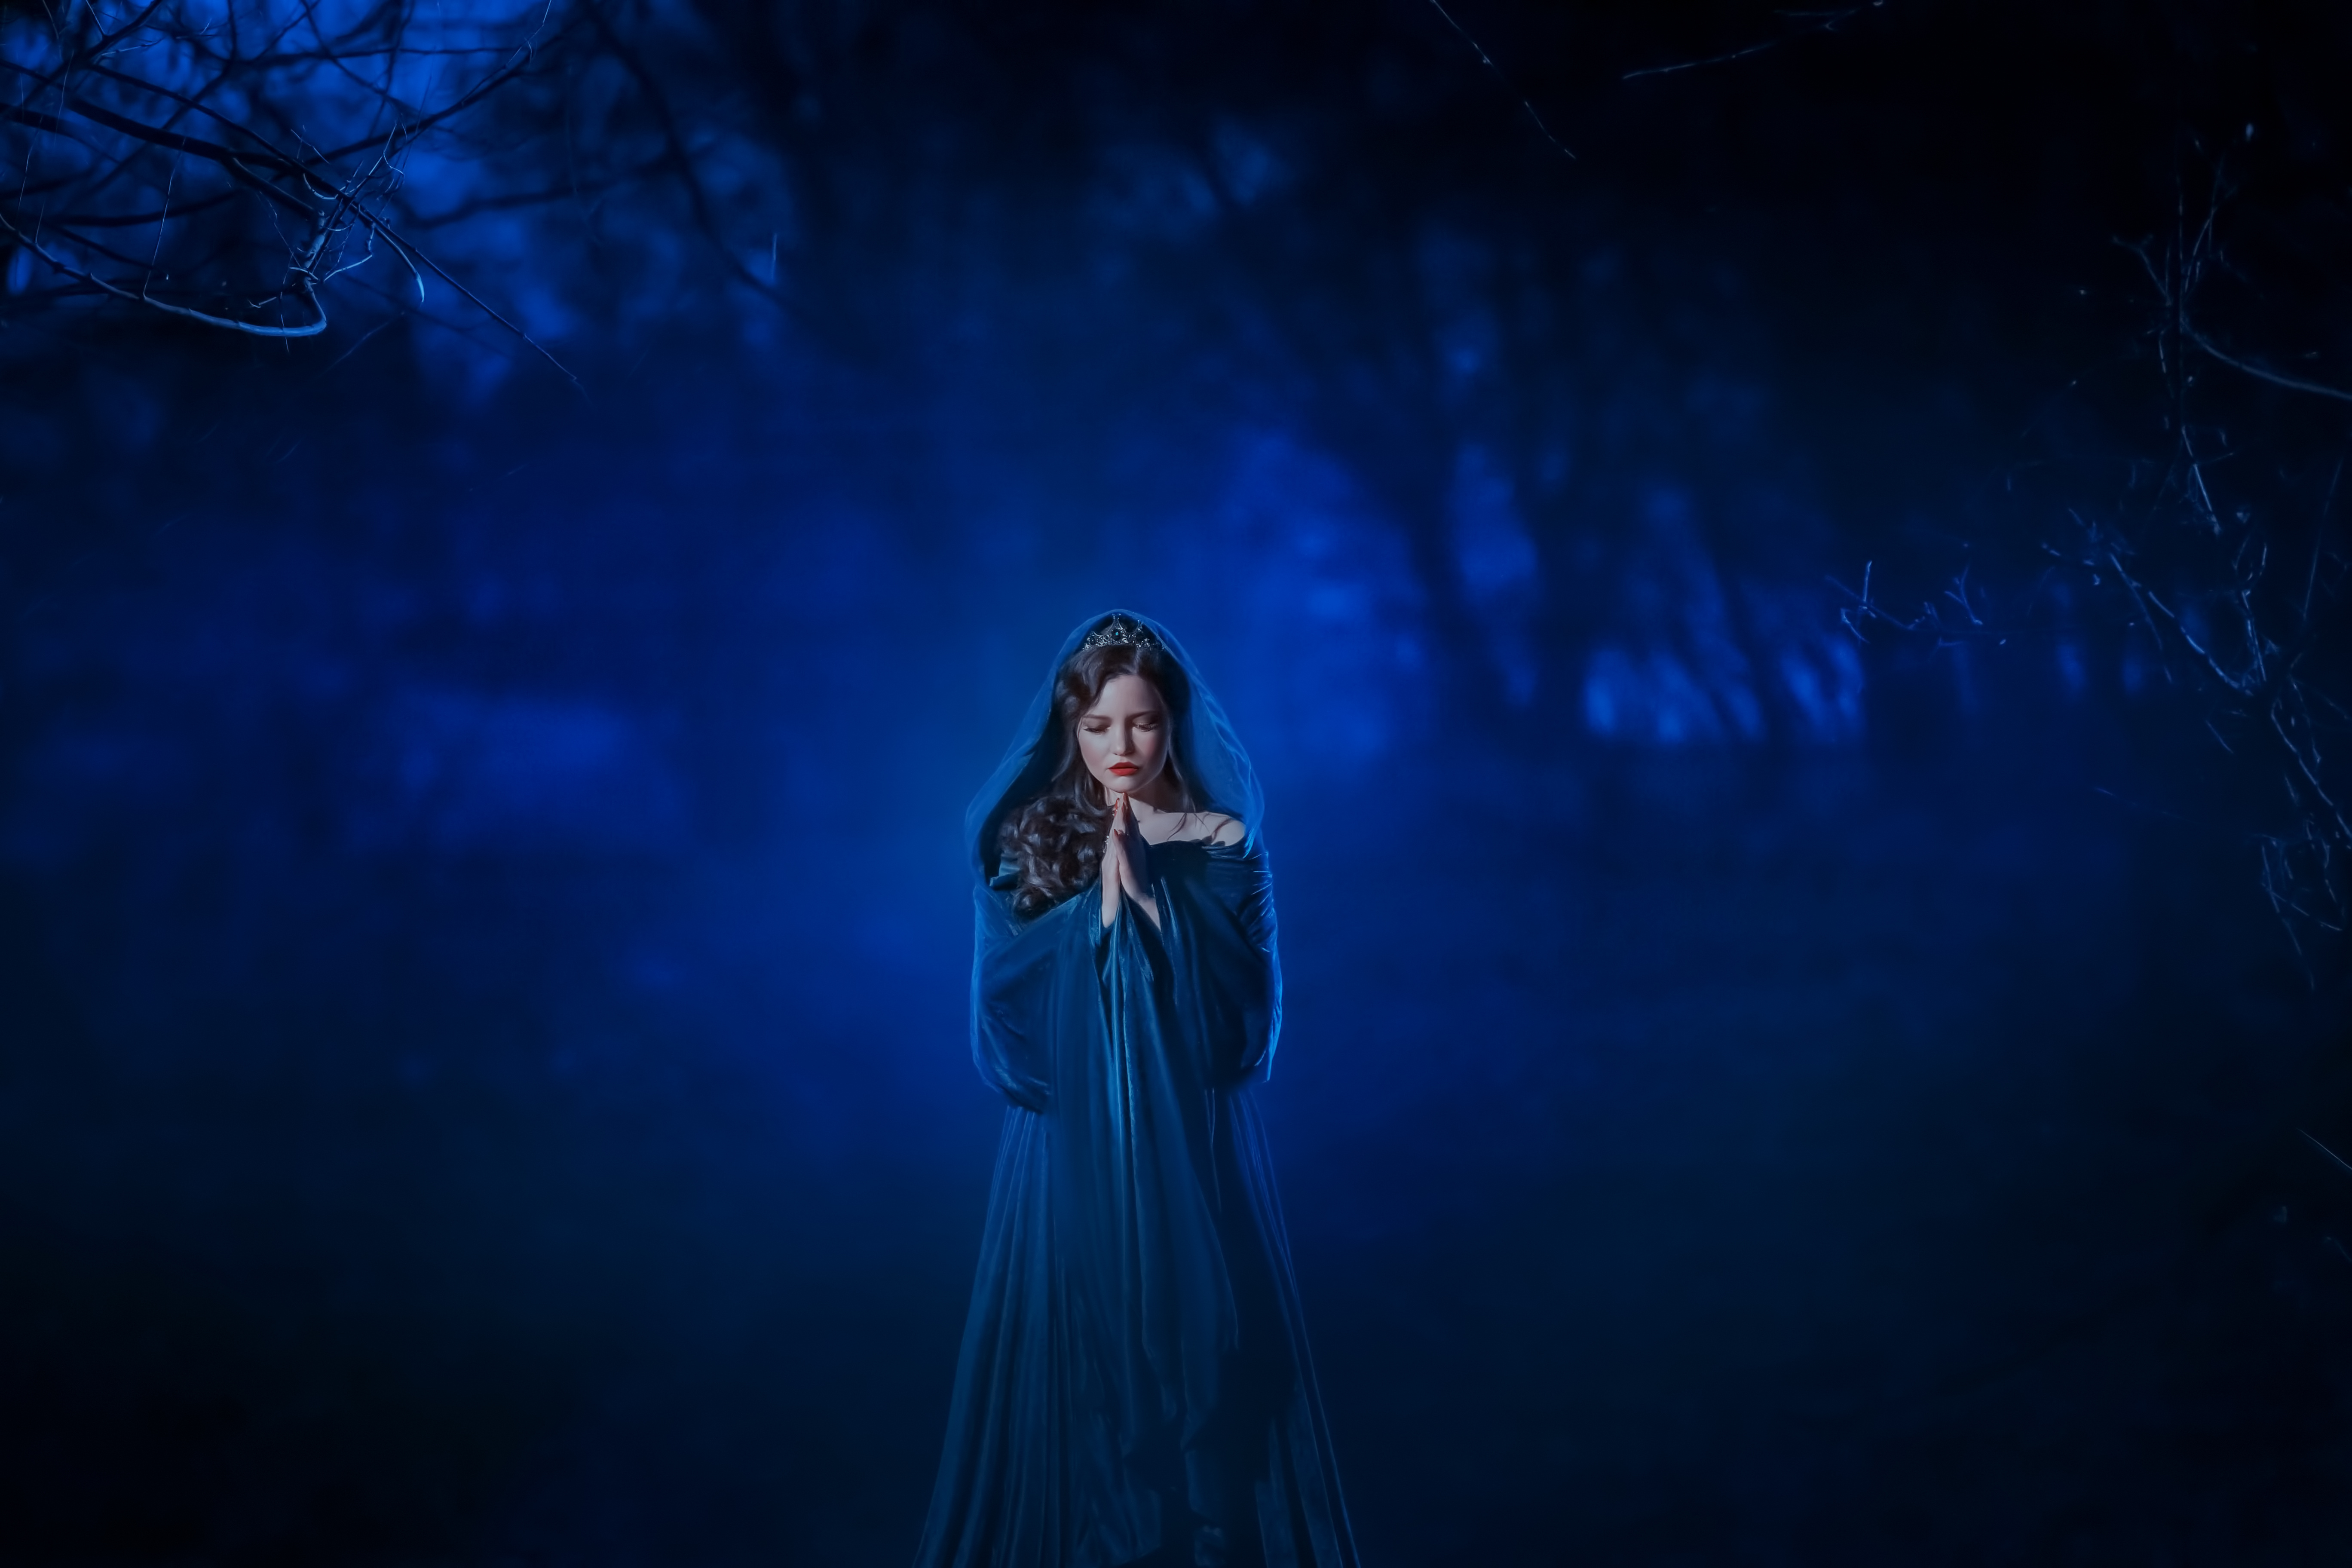 Art Mysterious woman ghost lady. blue dress cape hood. Fantasy queen stands in deep dark mystery forest scared face hands in pray. Frightened fear retro evil demon. holiday Halloween vampire costume